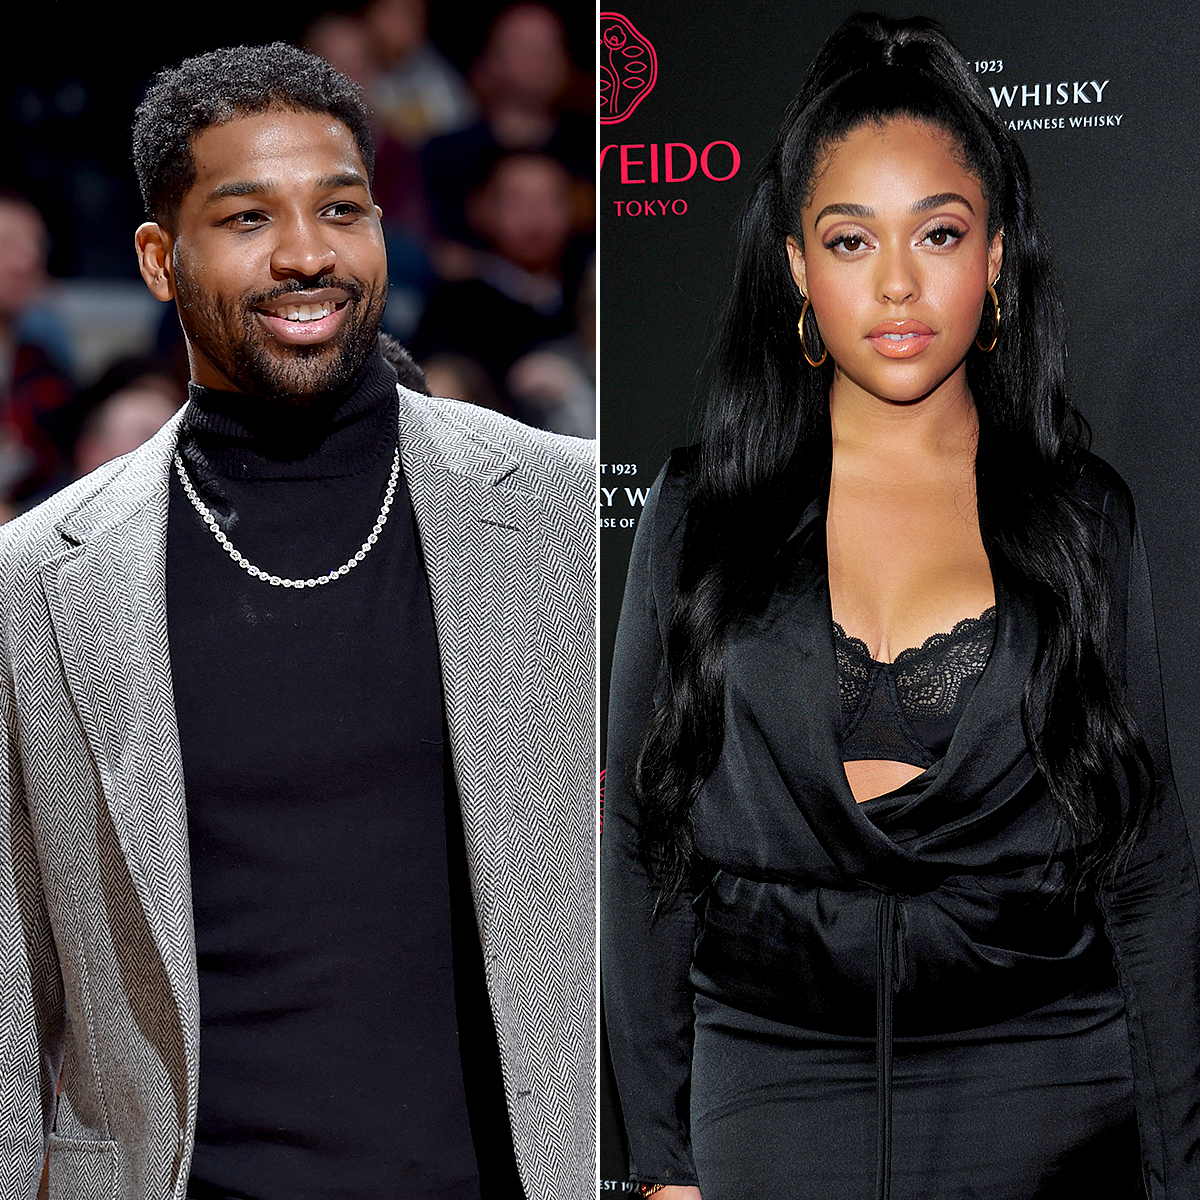 Tristan Thompson and Jordyn Woods ‘Were All Over Each Other’ at House